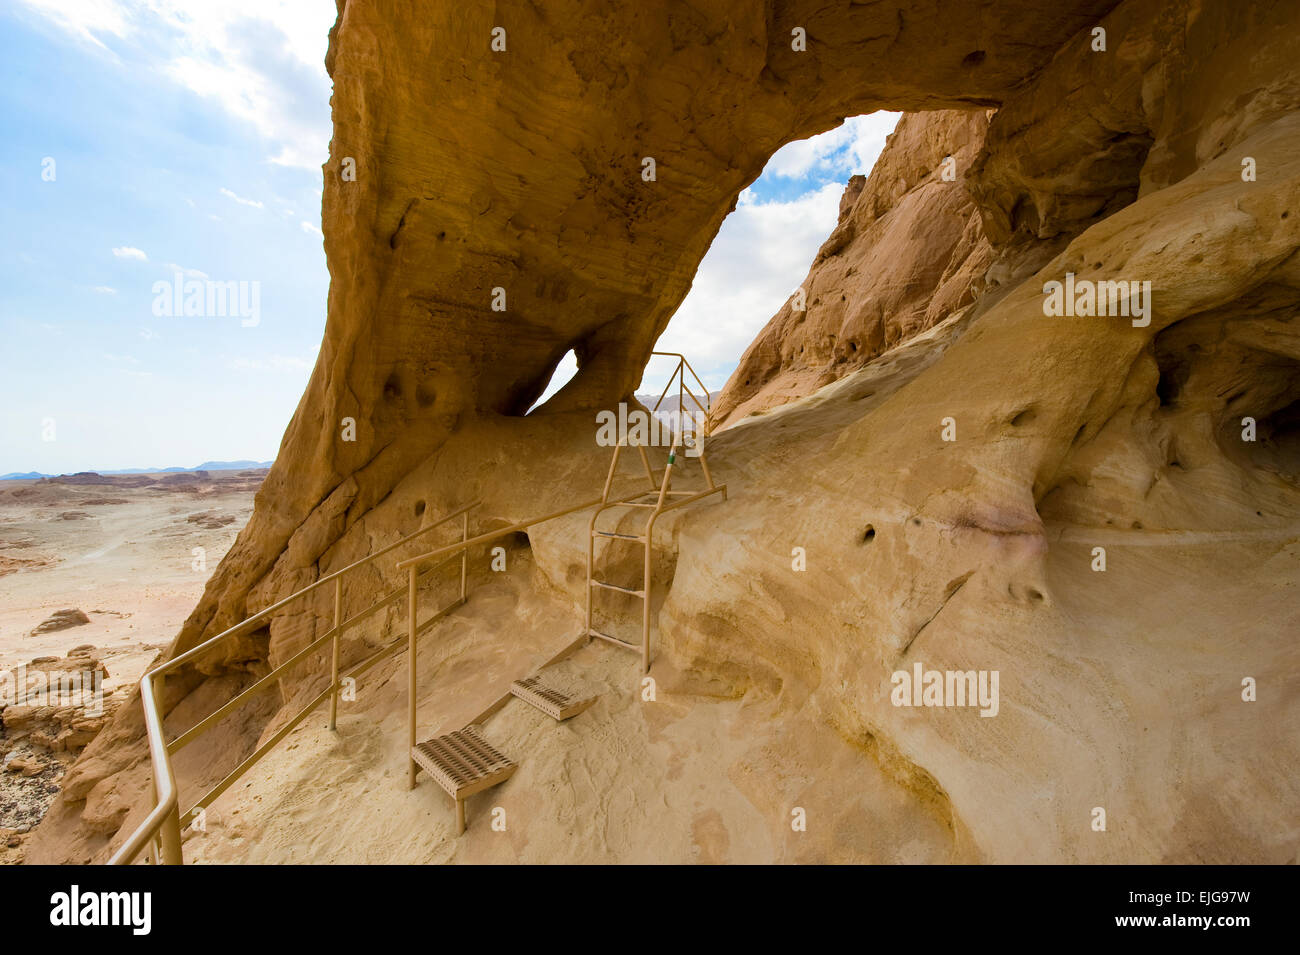 The Arches rock formation at Timna Park in the southern negev desert in Israel Stock Photo